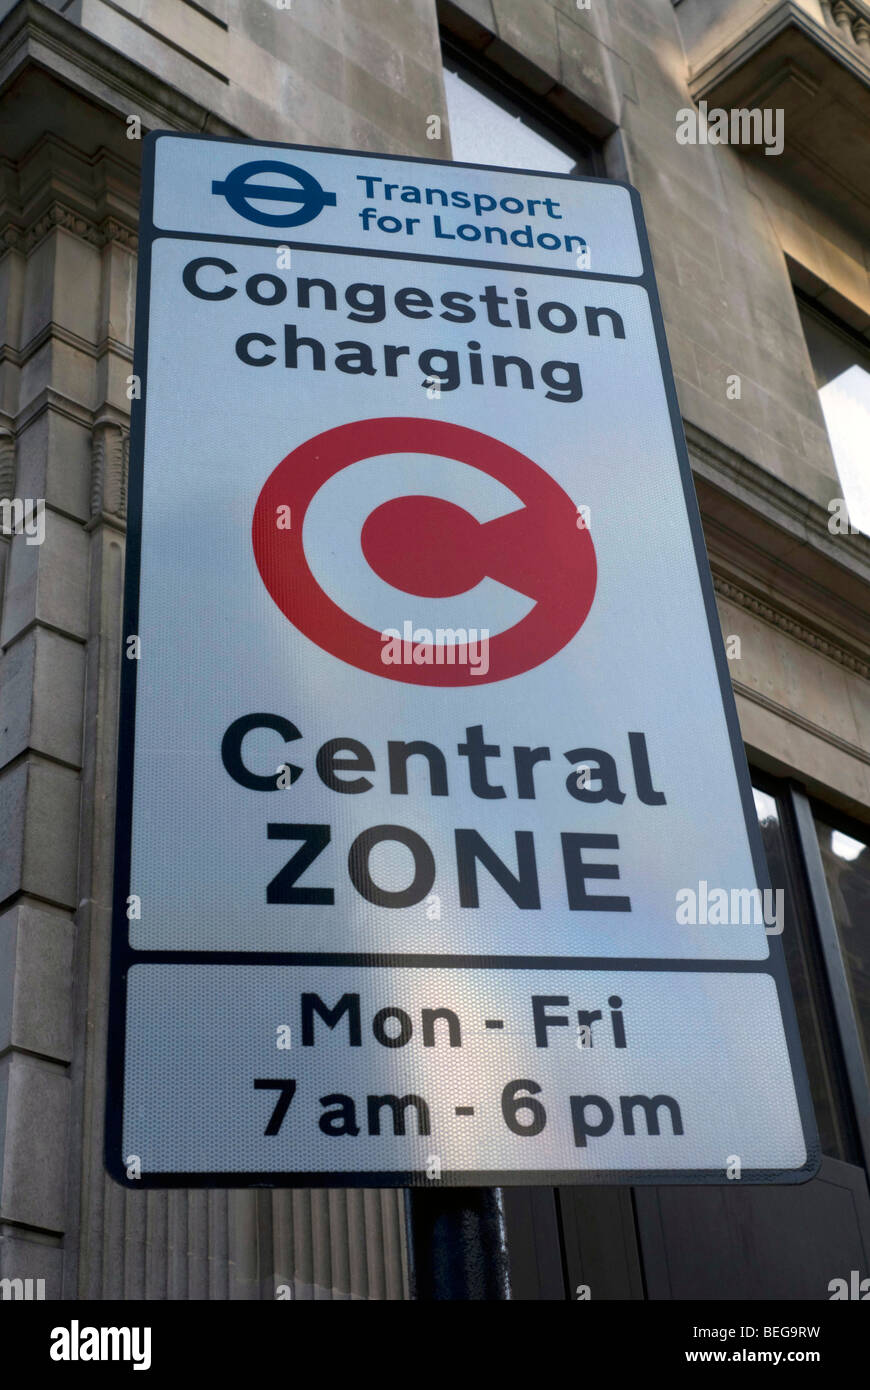 Congestion Charging sign in London Stock Photo